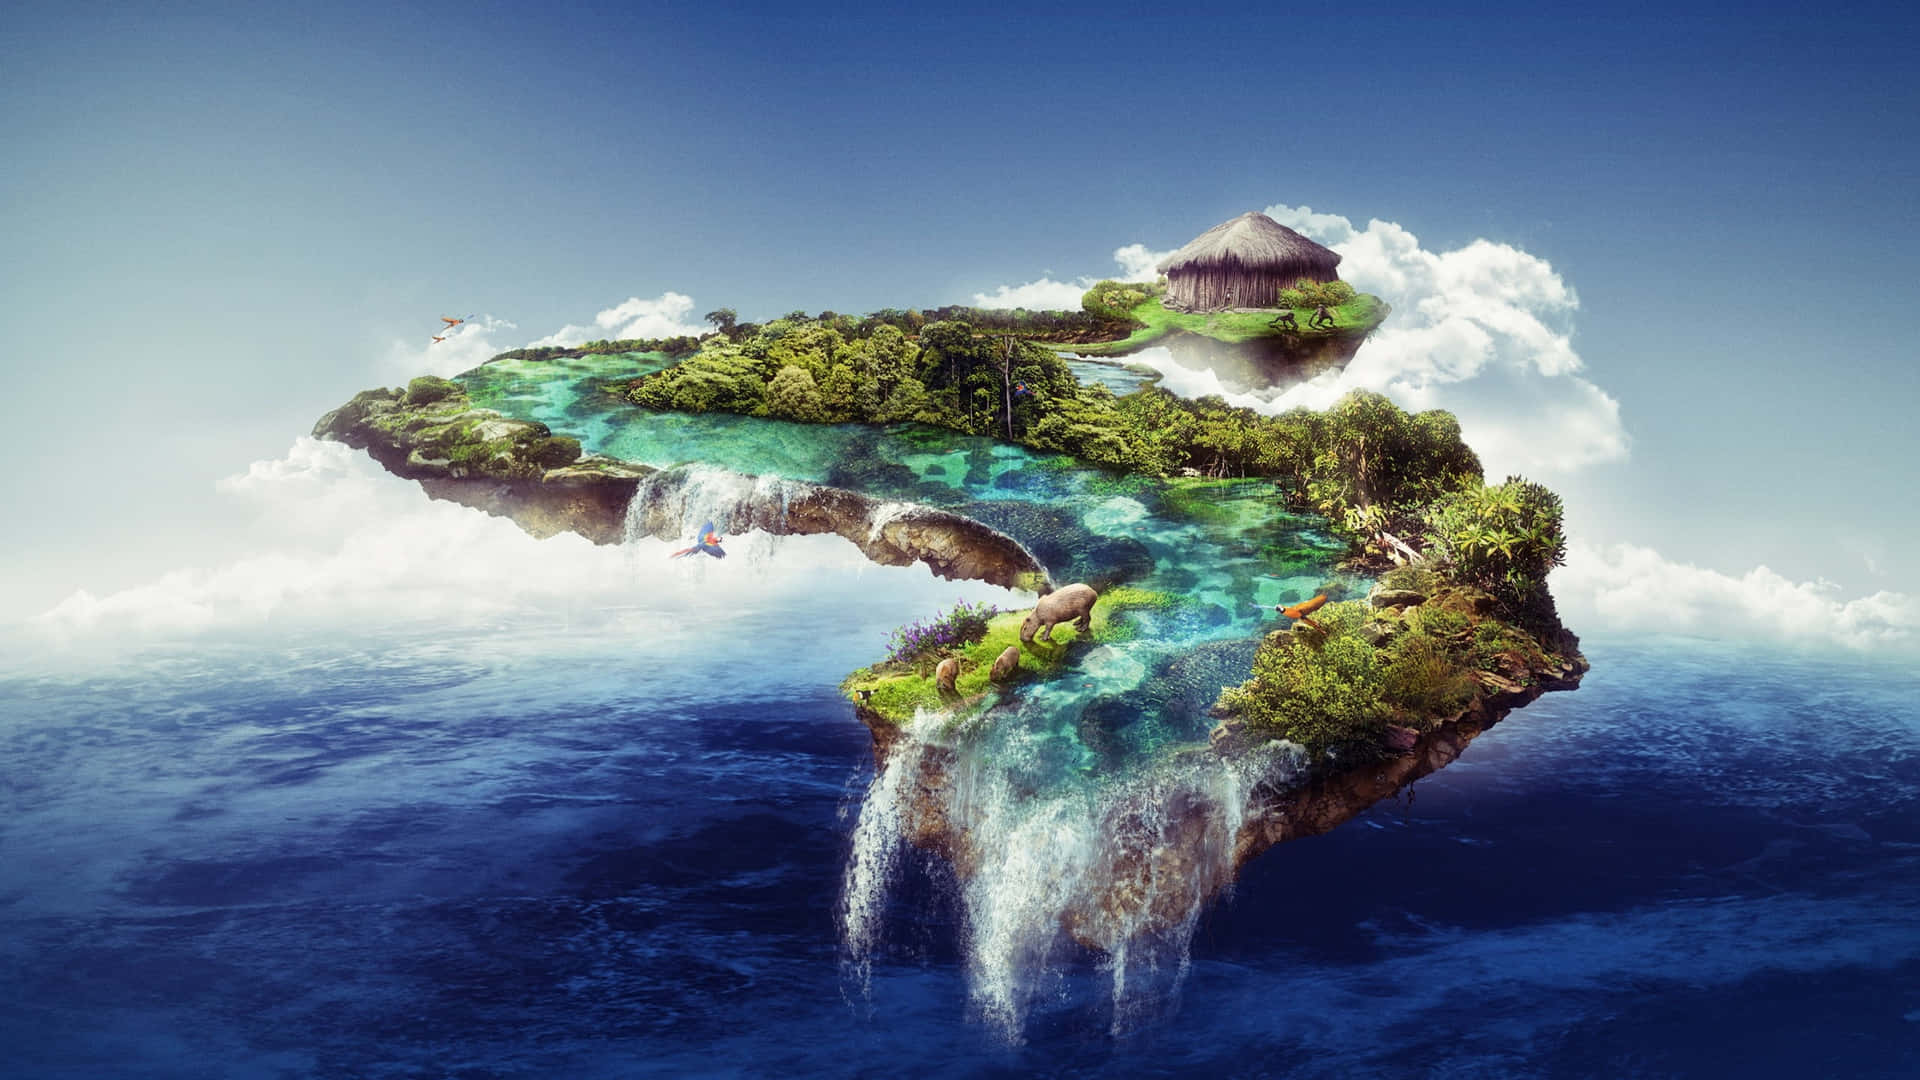 Serene and secluded Floating Island